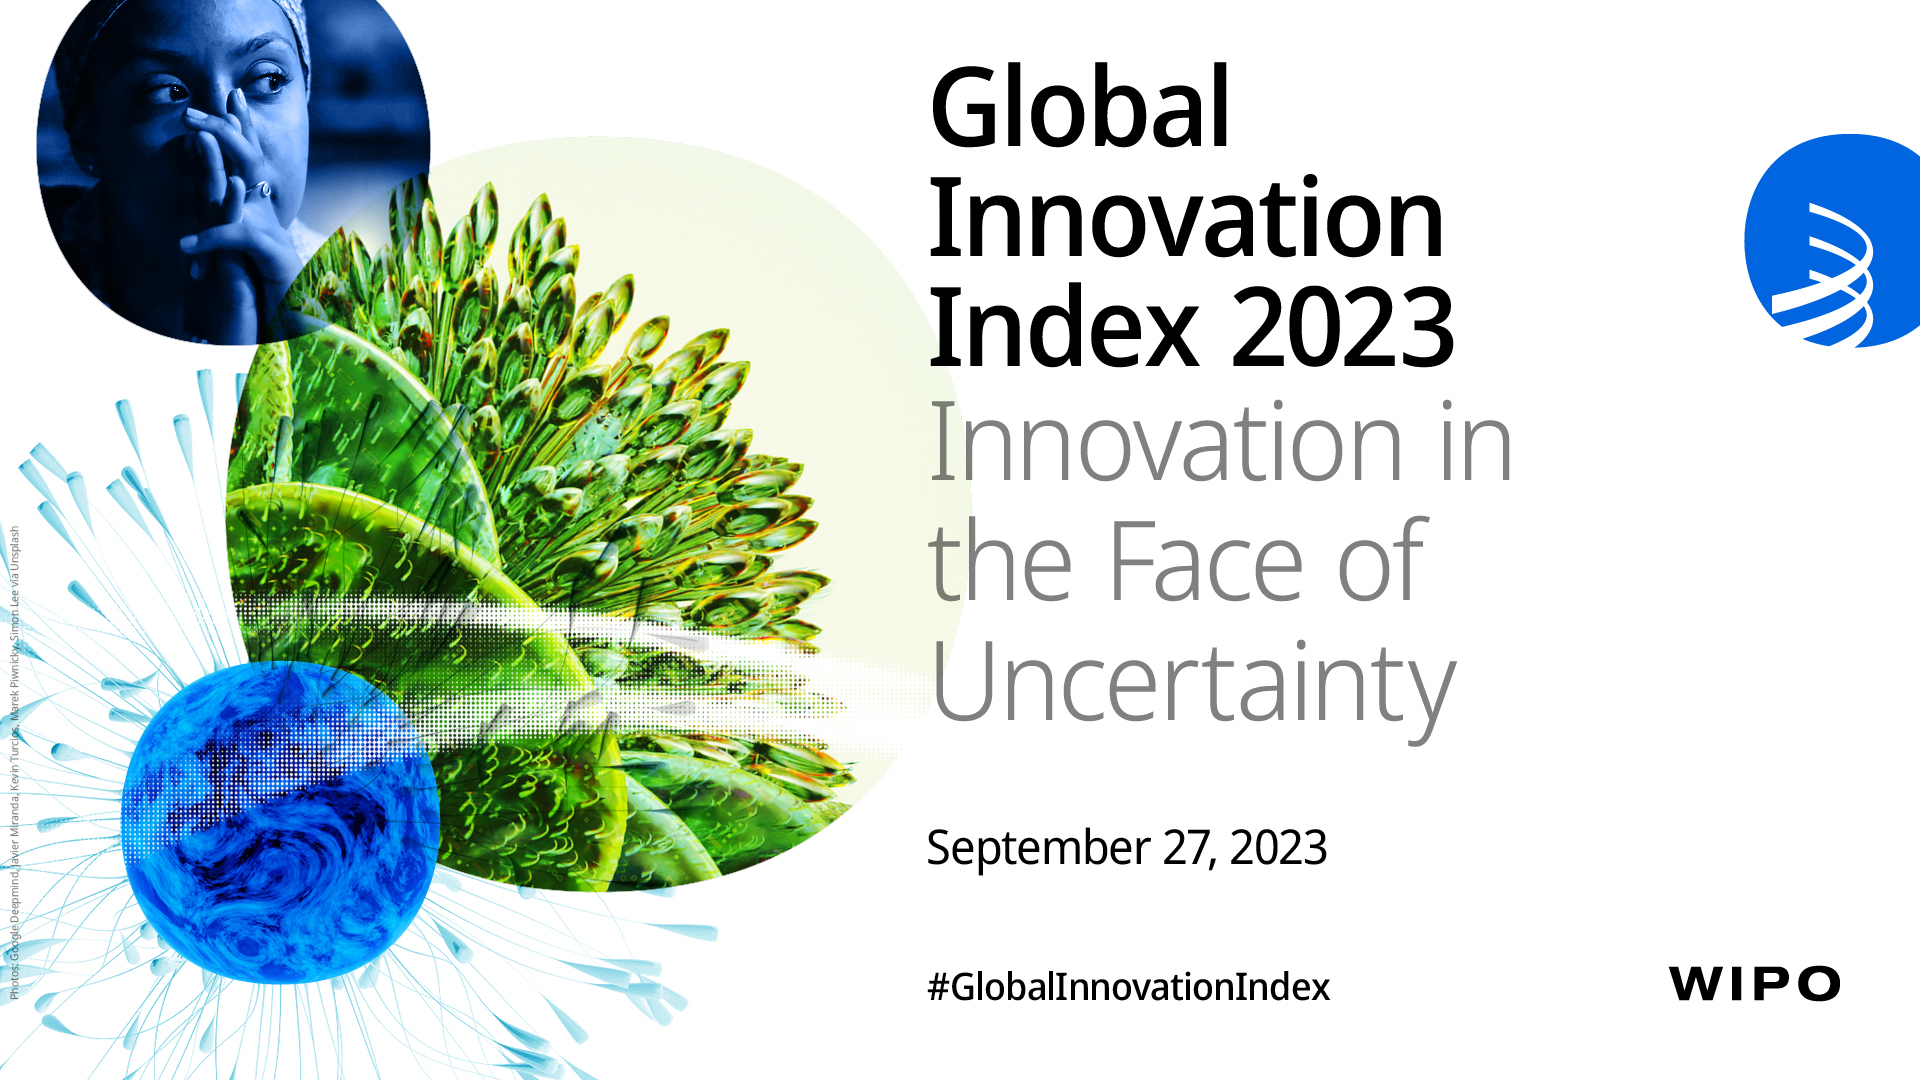 Launch of the Global Innovation Index 2023